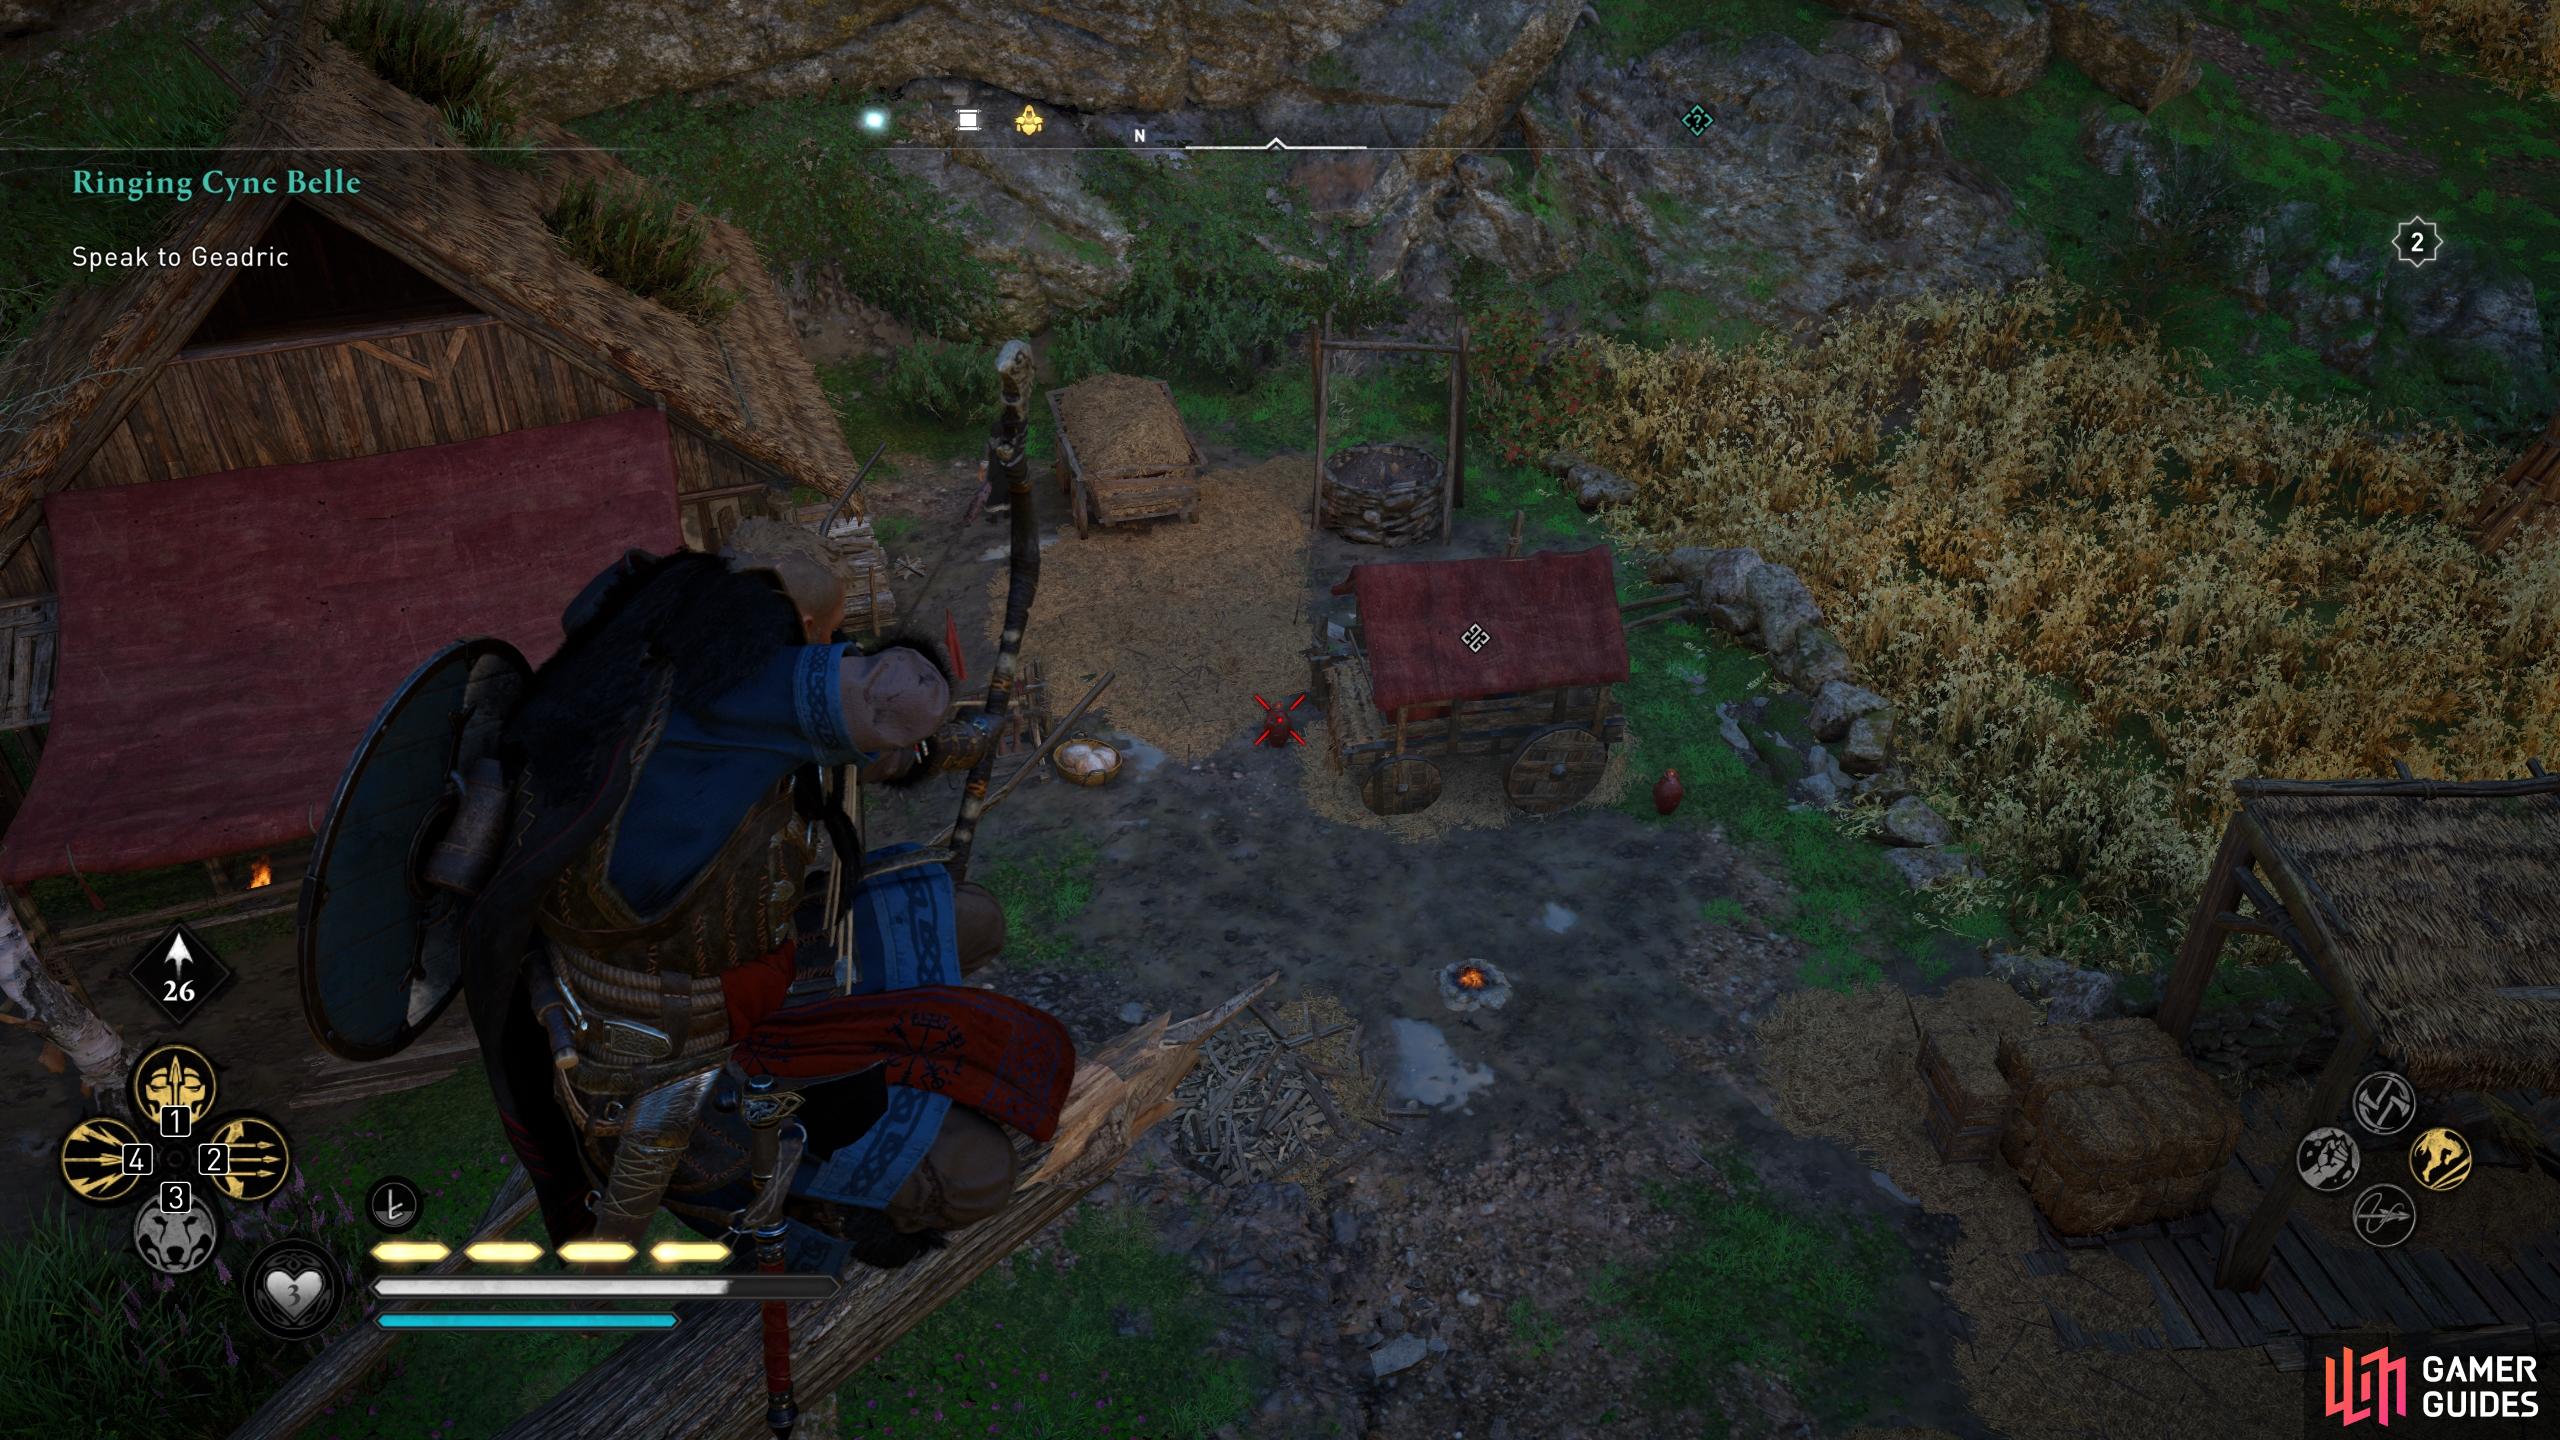 At the end of the quest, you can destroy the supply carts if you haven't yet completed Chipping Away.